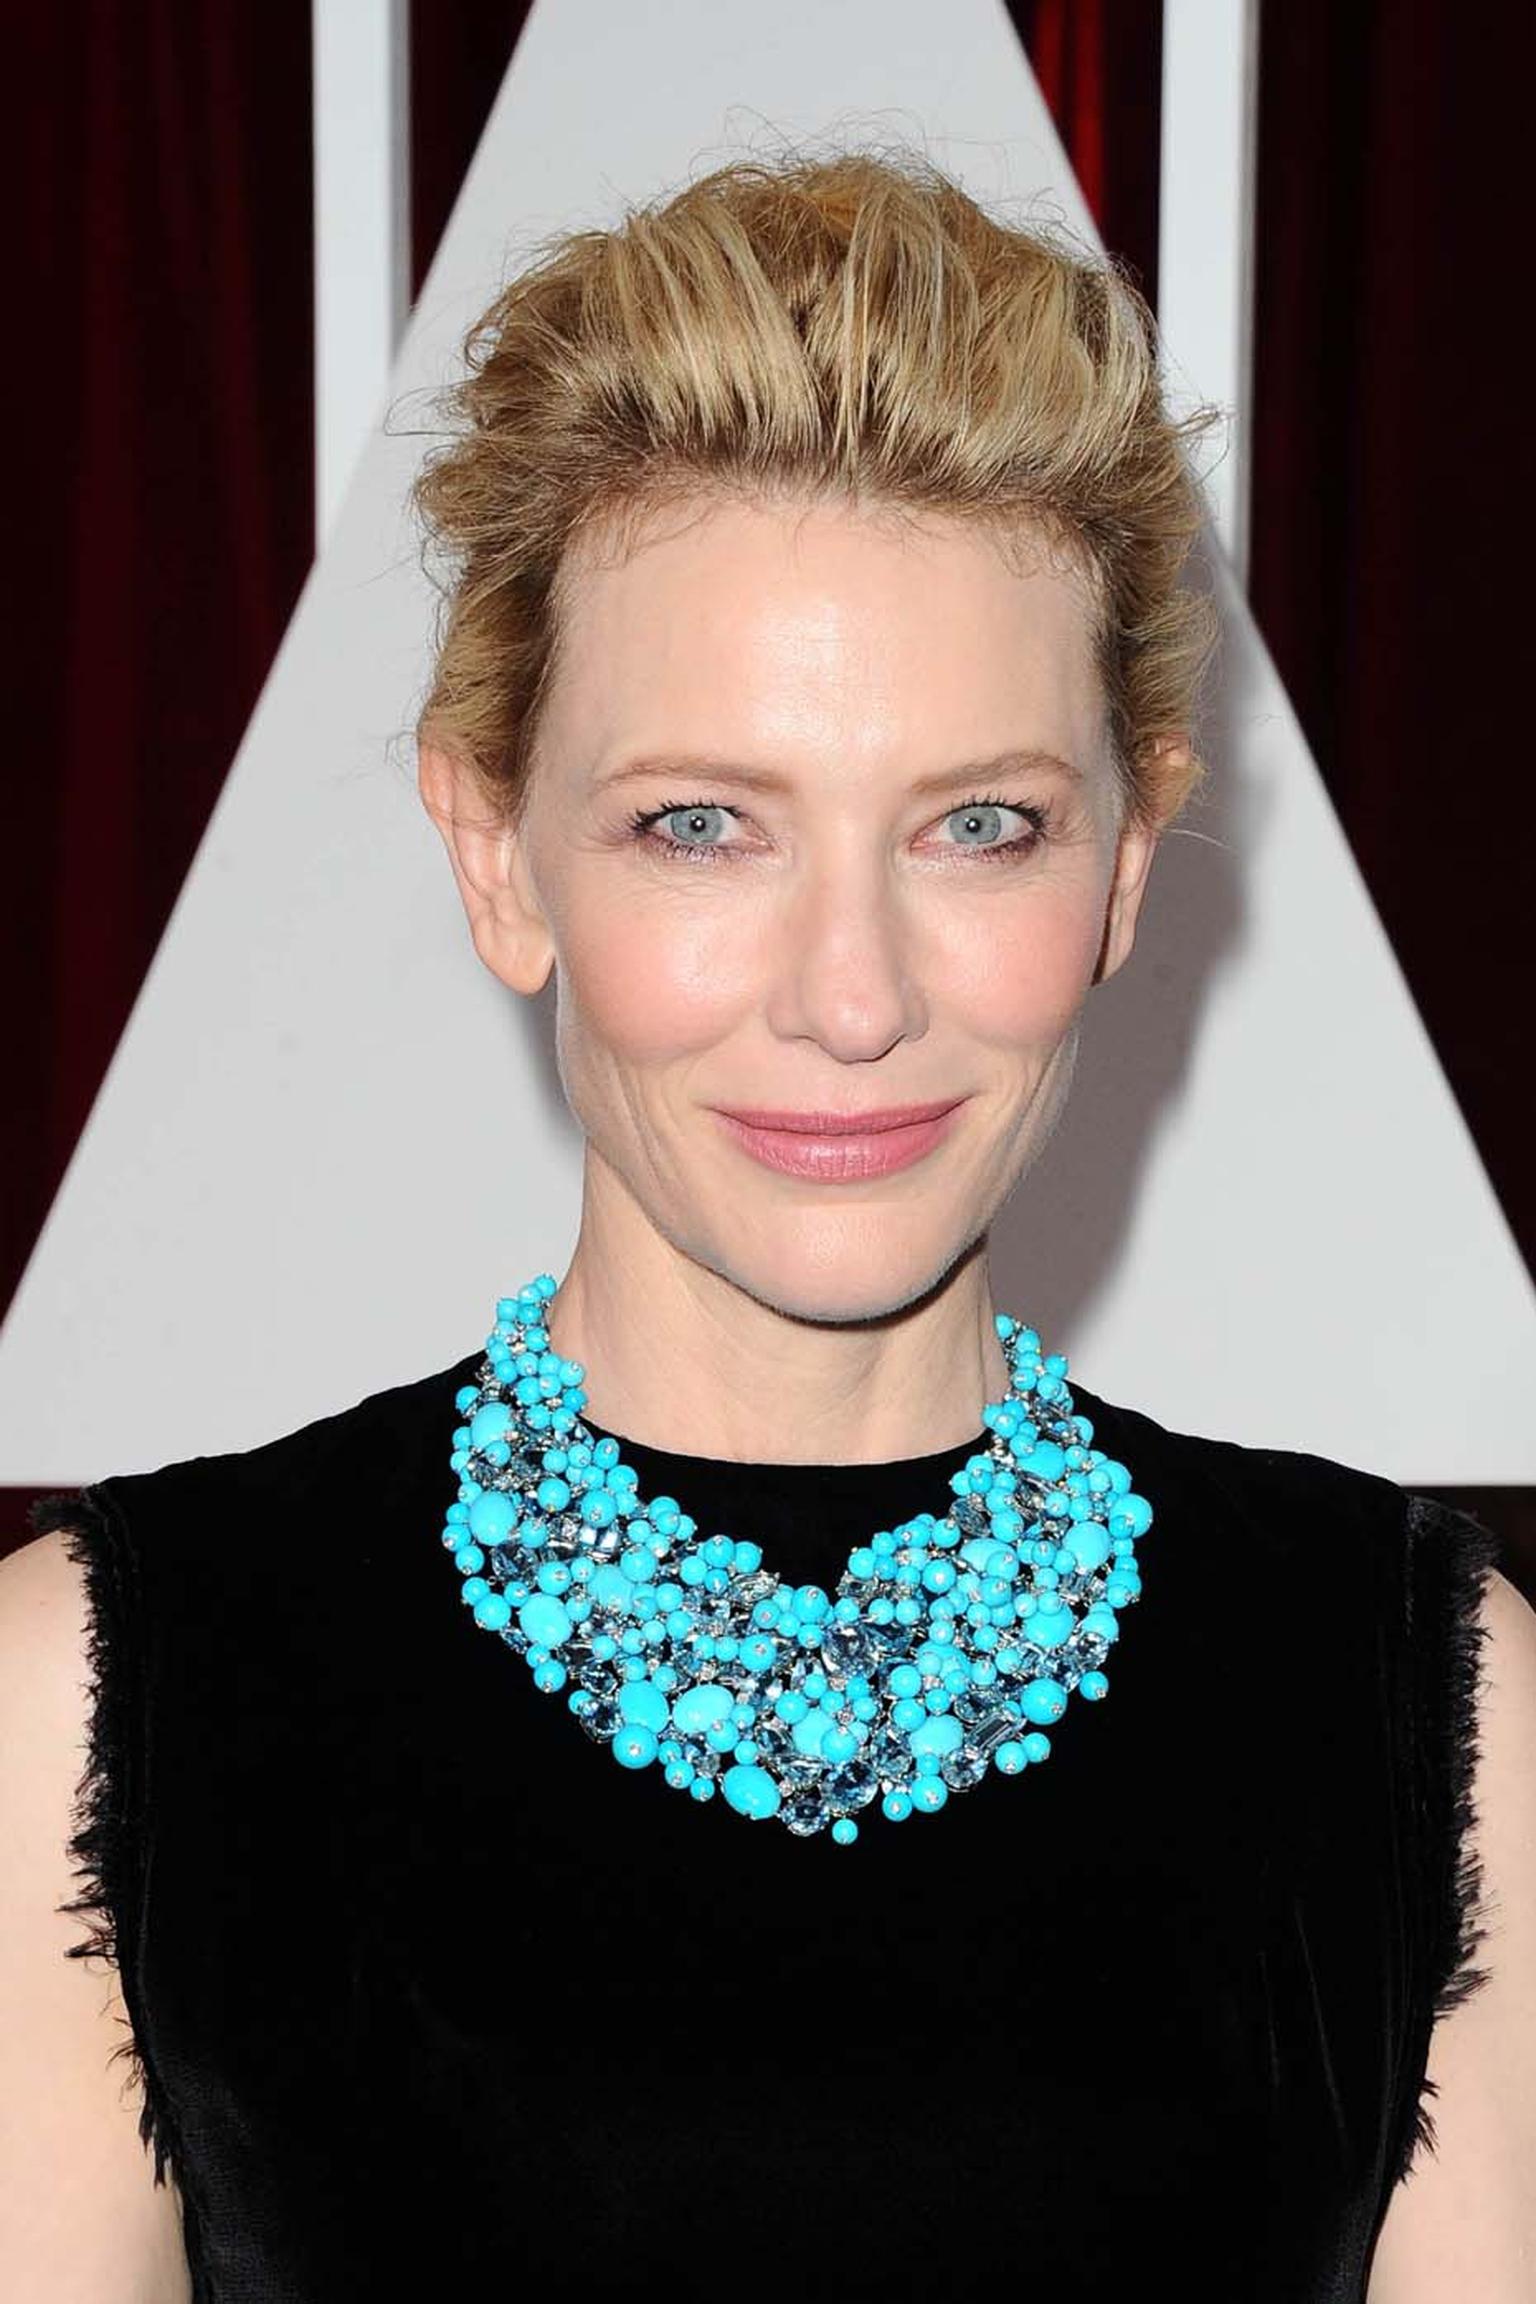 Actress Cate Blanchett wearing an aquamarine, diamond and turquoise necklace from Tiffany & Co's latest Blue Book collection to the 87th Academy Awards in Los Angeles.